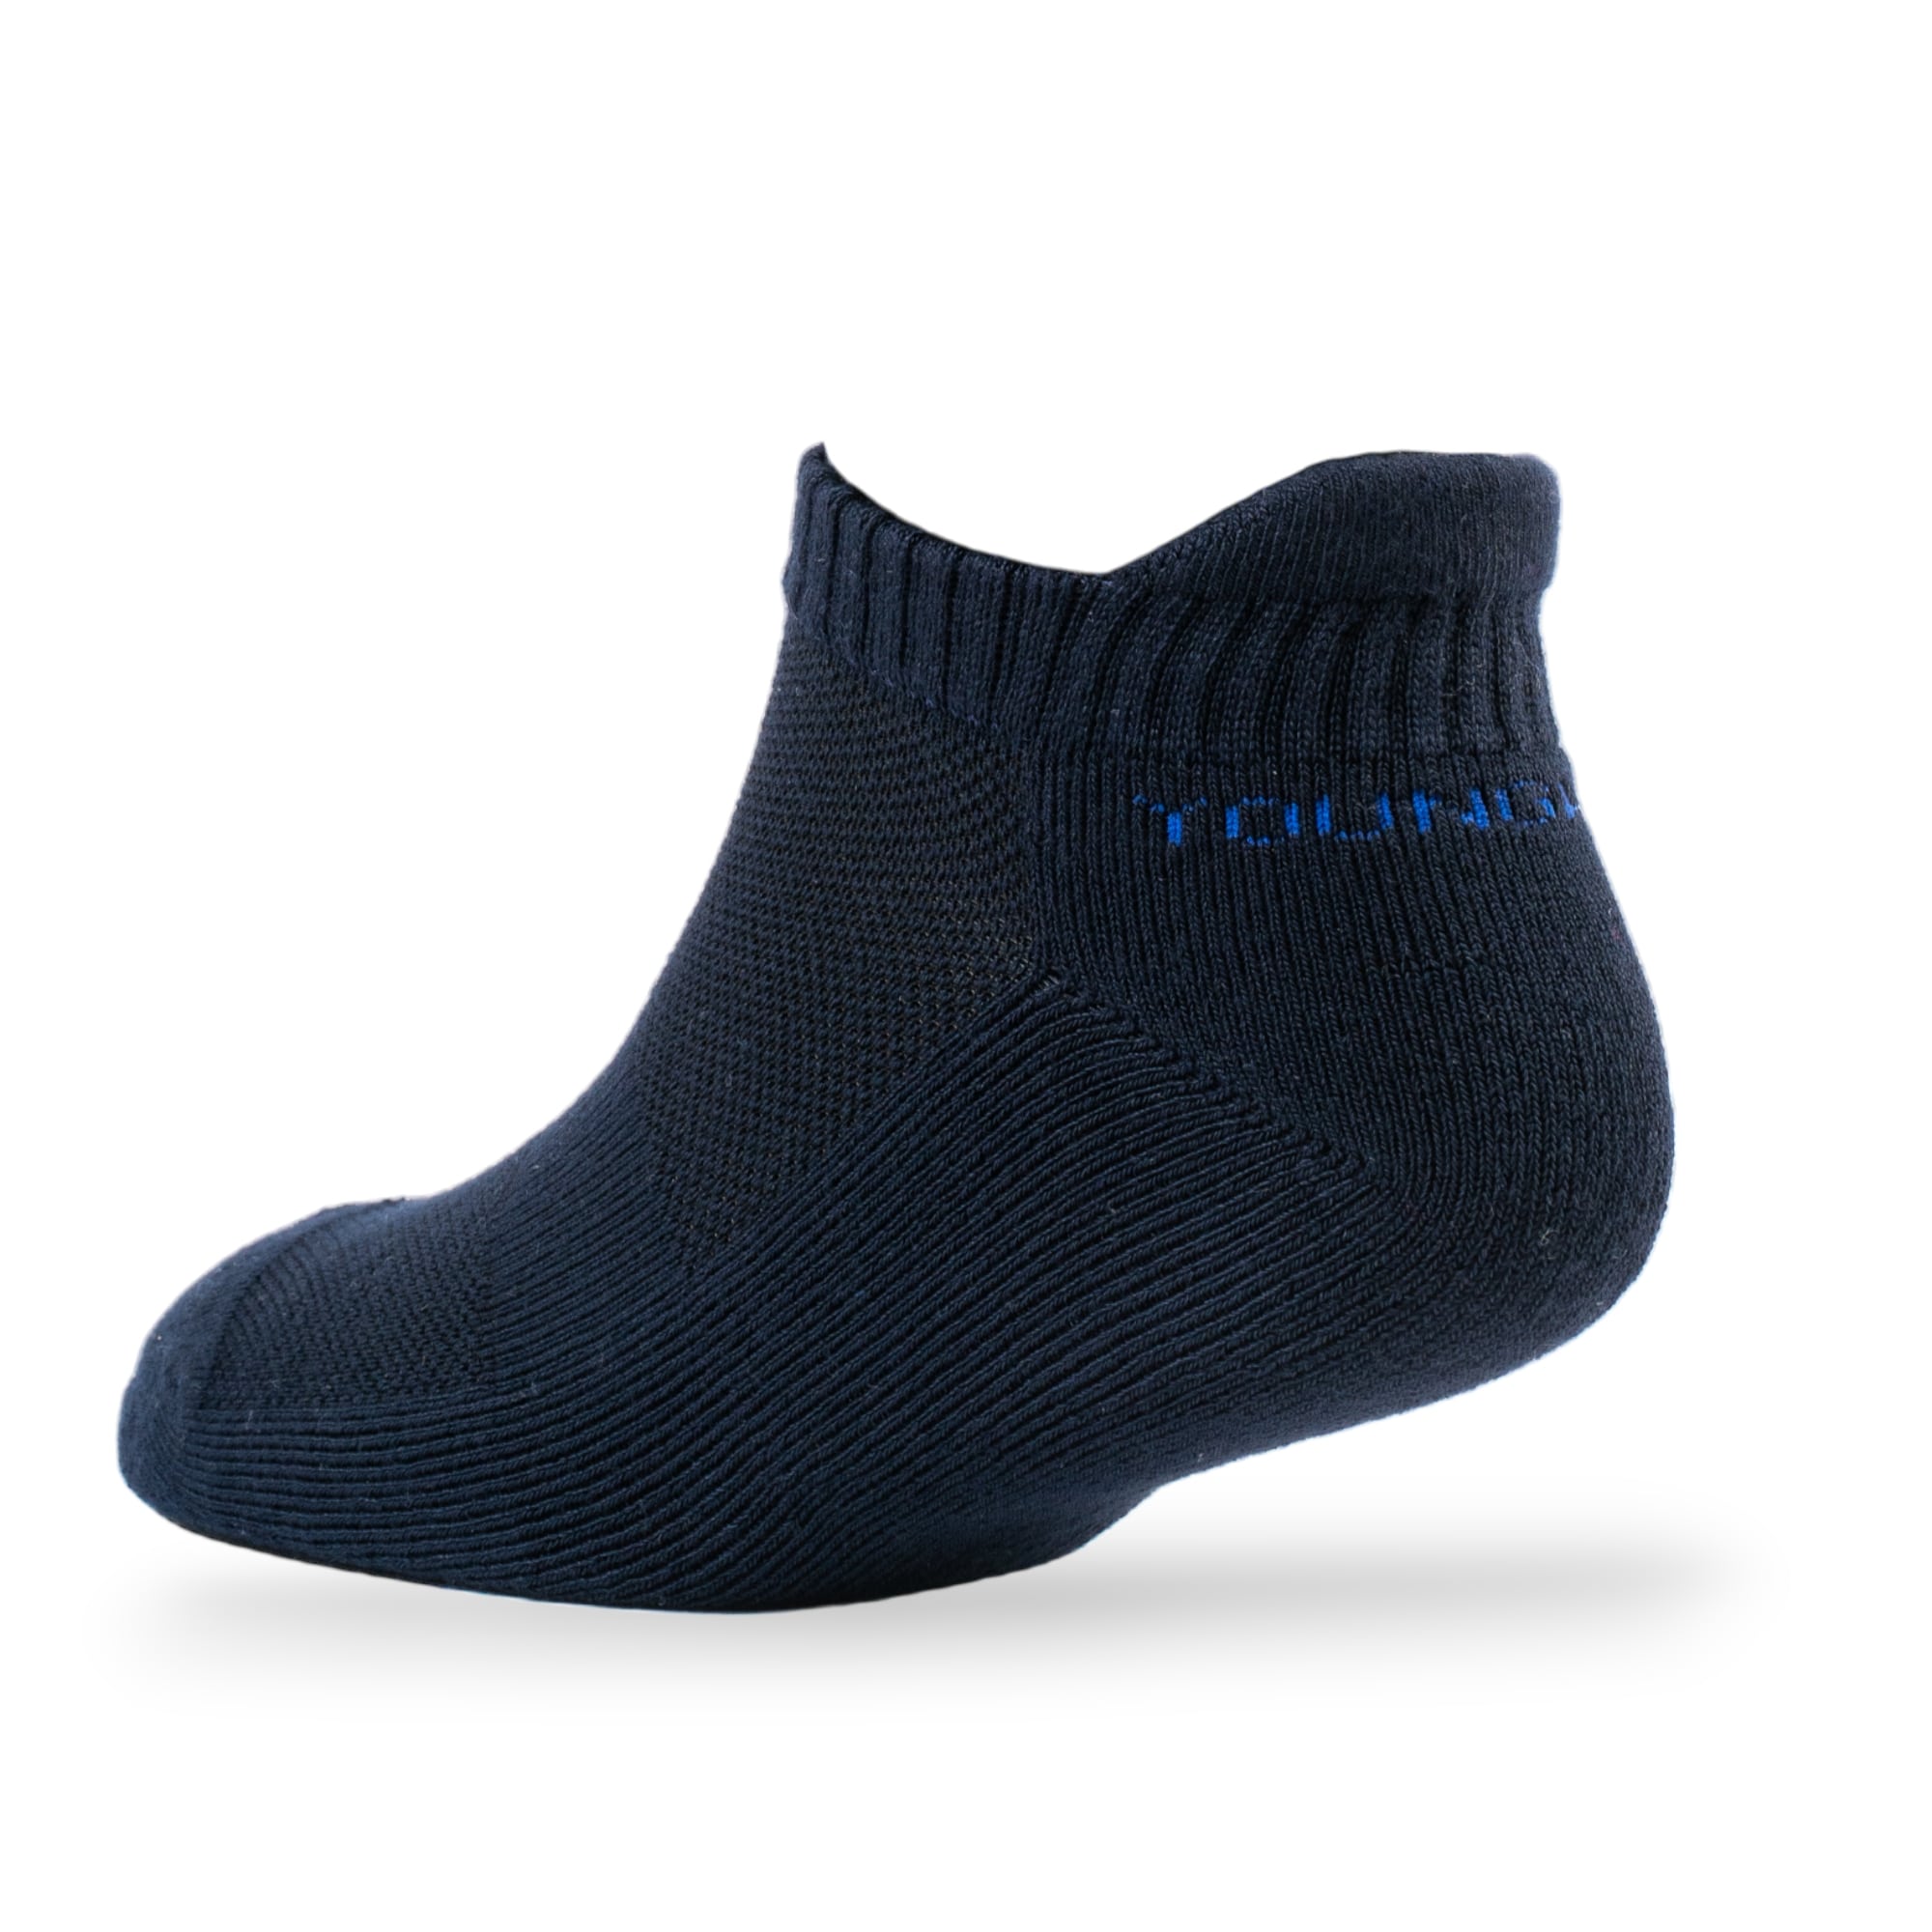 Young Wings Bamboo Fabric Solid Design Ankle Length Sports Socks - Pack of 3, Style no.2613-M3